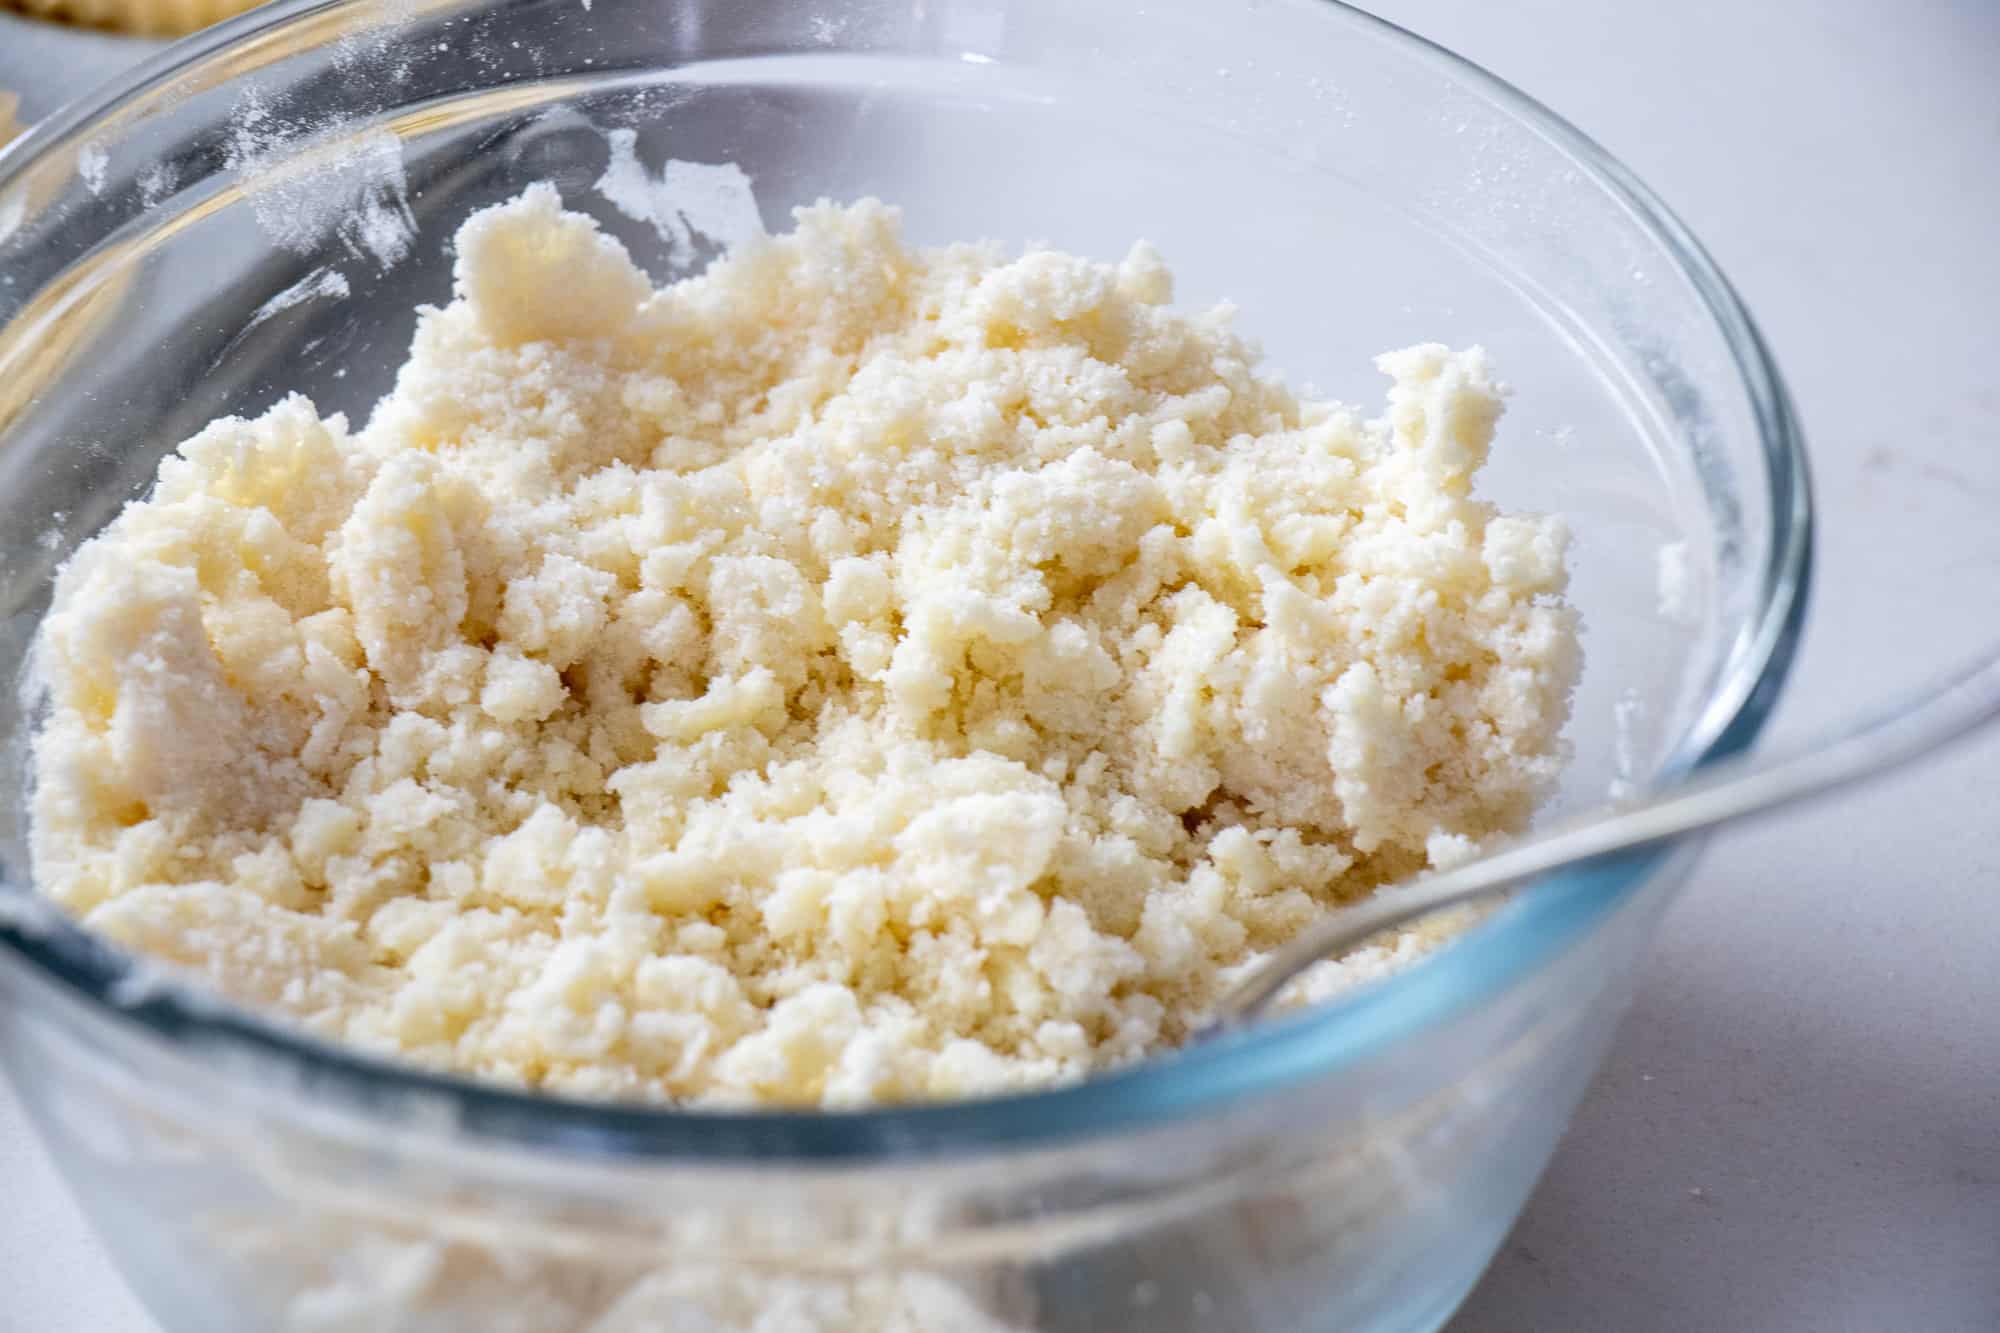 Make the crumble topping with cold butter.